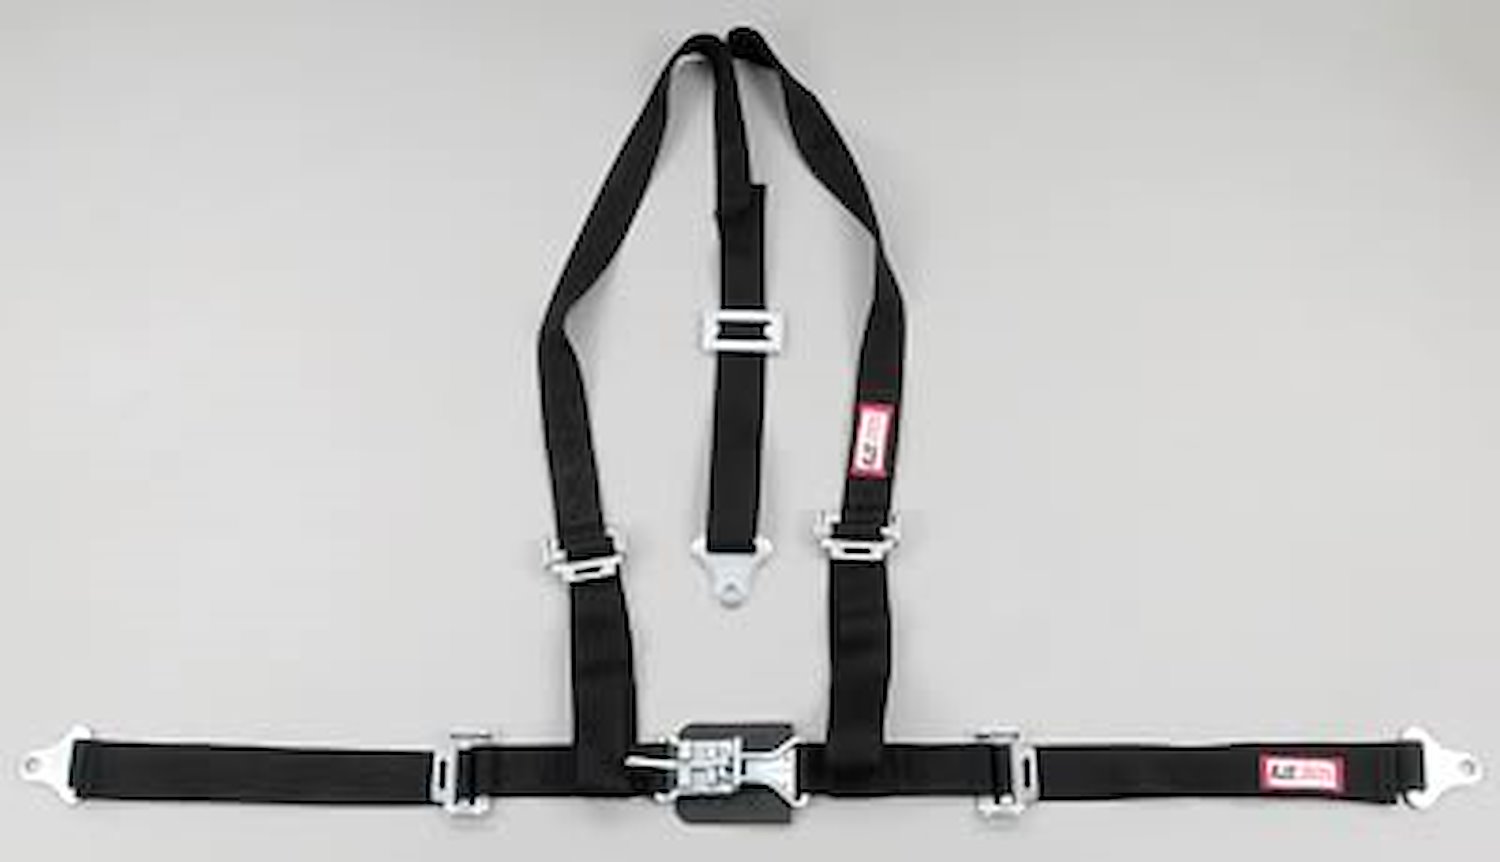 NON-SFI L&L HARNESS 2 PULL DOWN Lap Belt SEWN IN 2 S.H. V ROLL BAR Mount w/STERNUM STRAP ALL WRAP ENDS GRAY